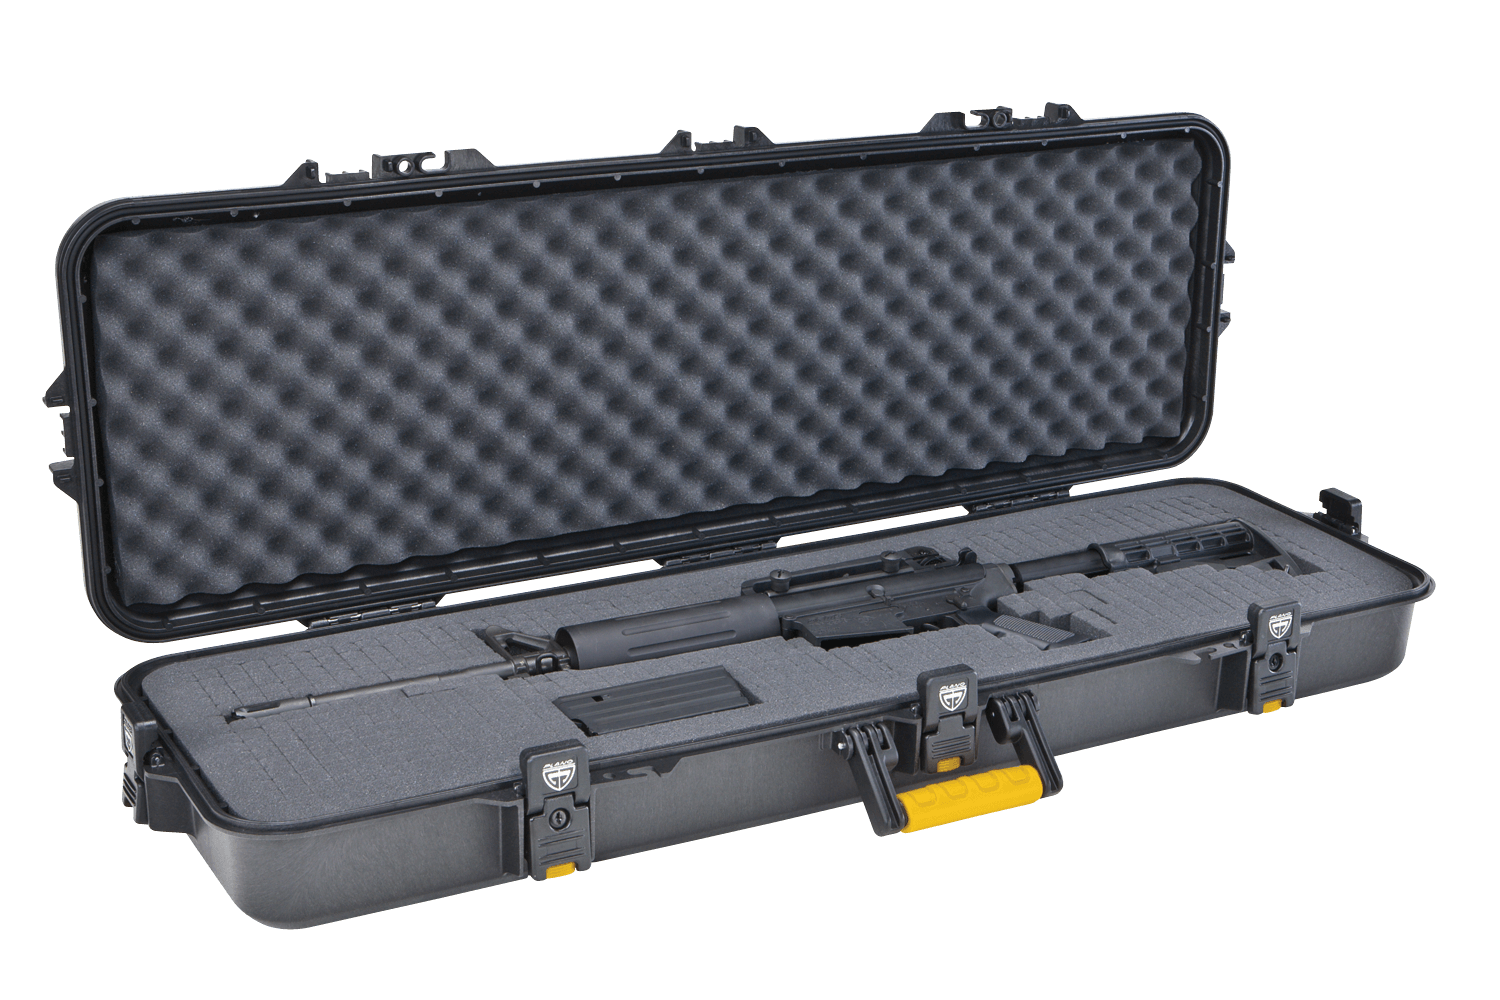 Plano All Weather Single Rifle Case, Black - image 1 of 9